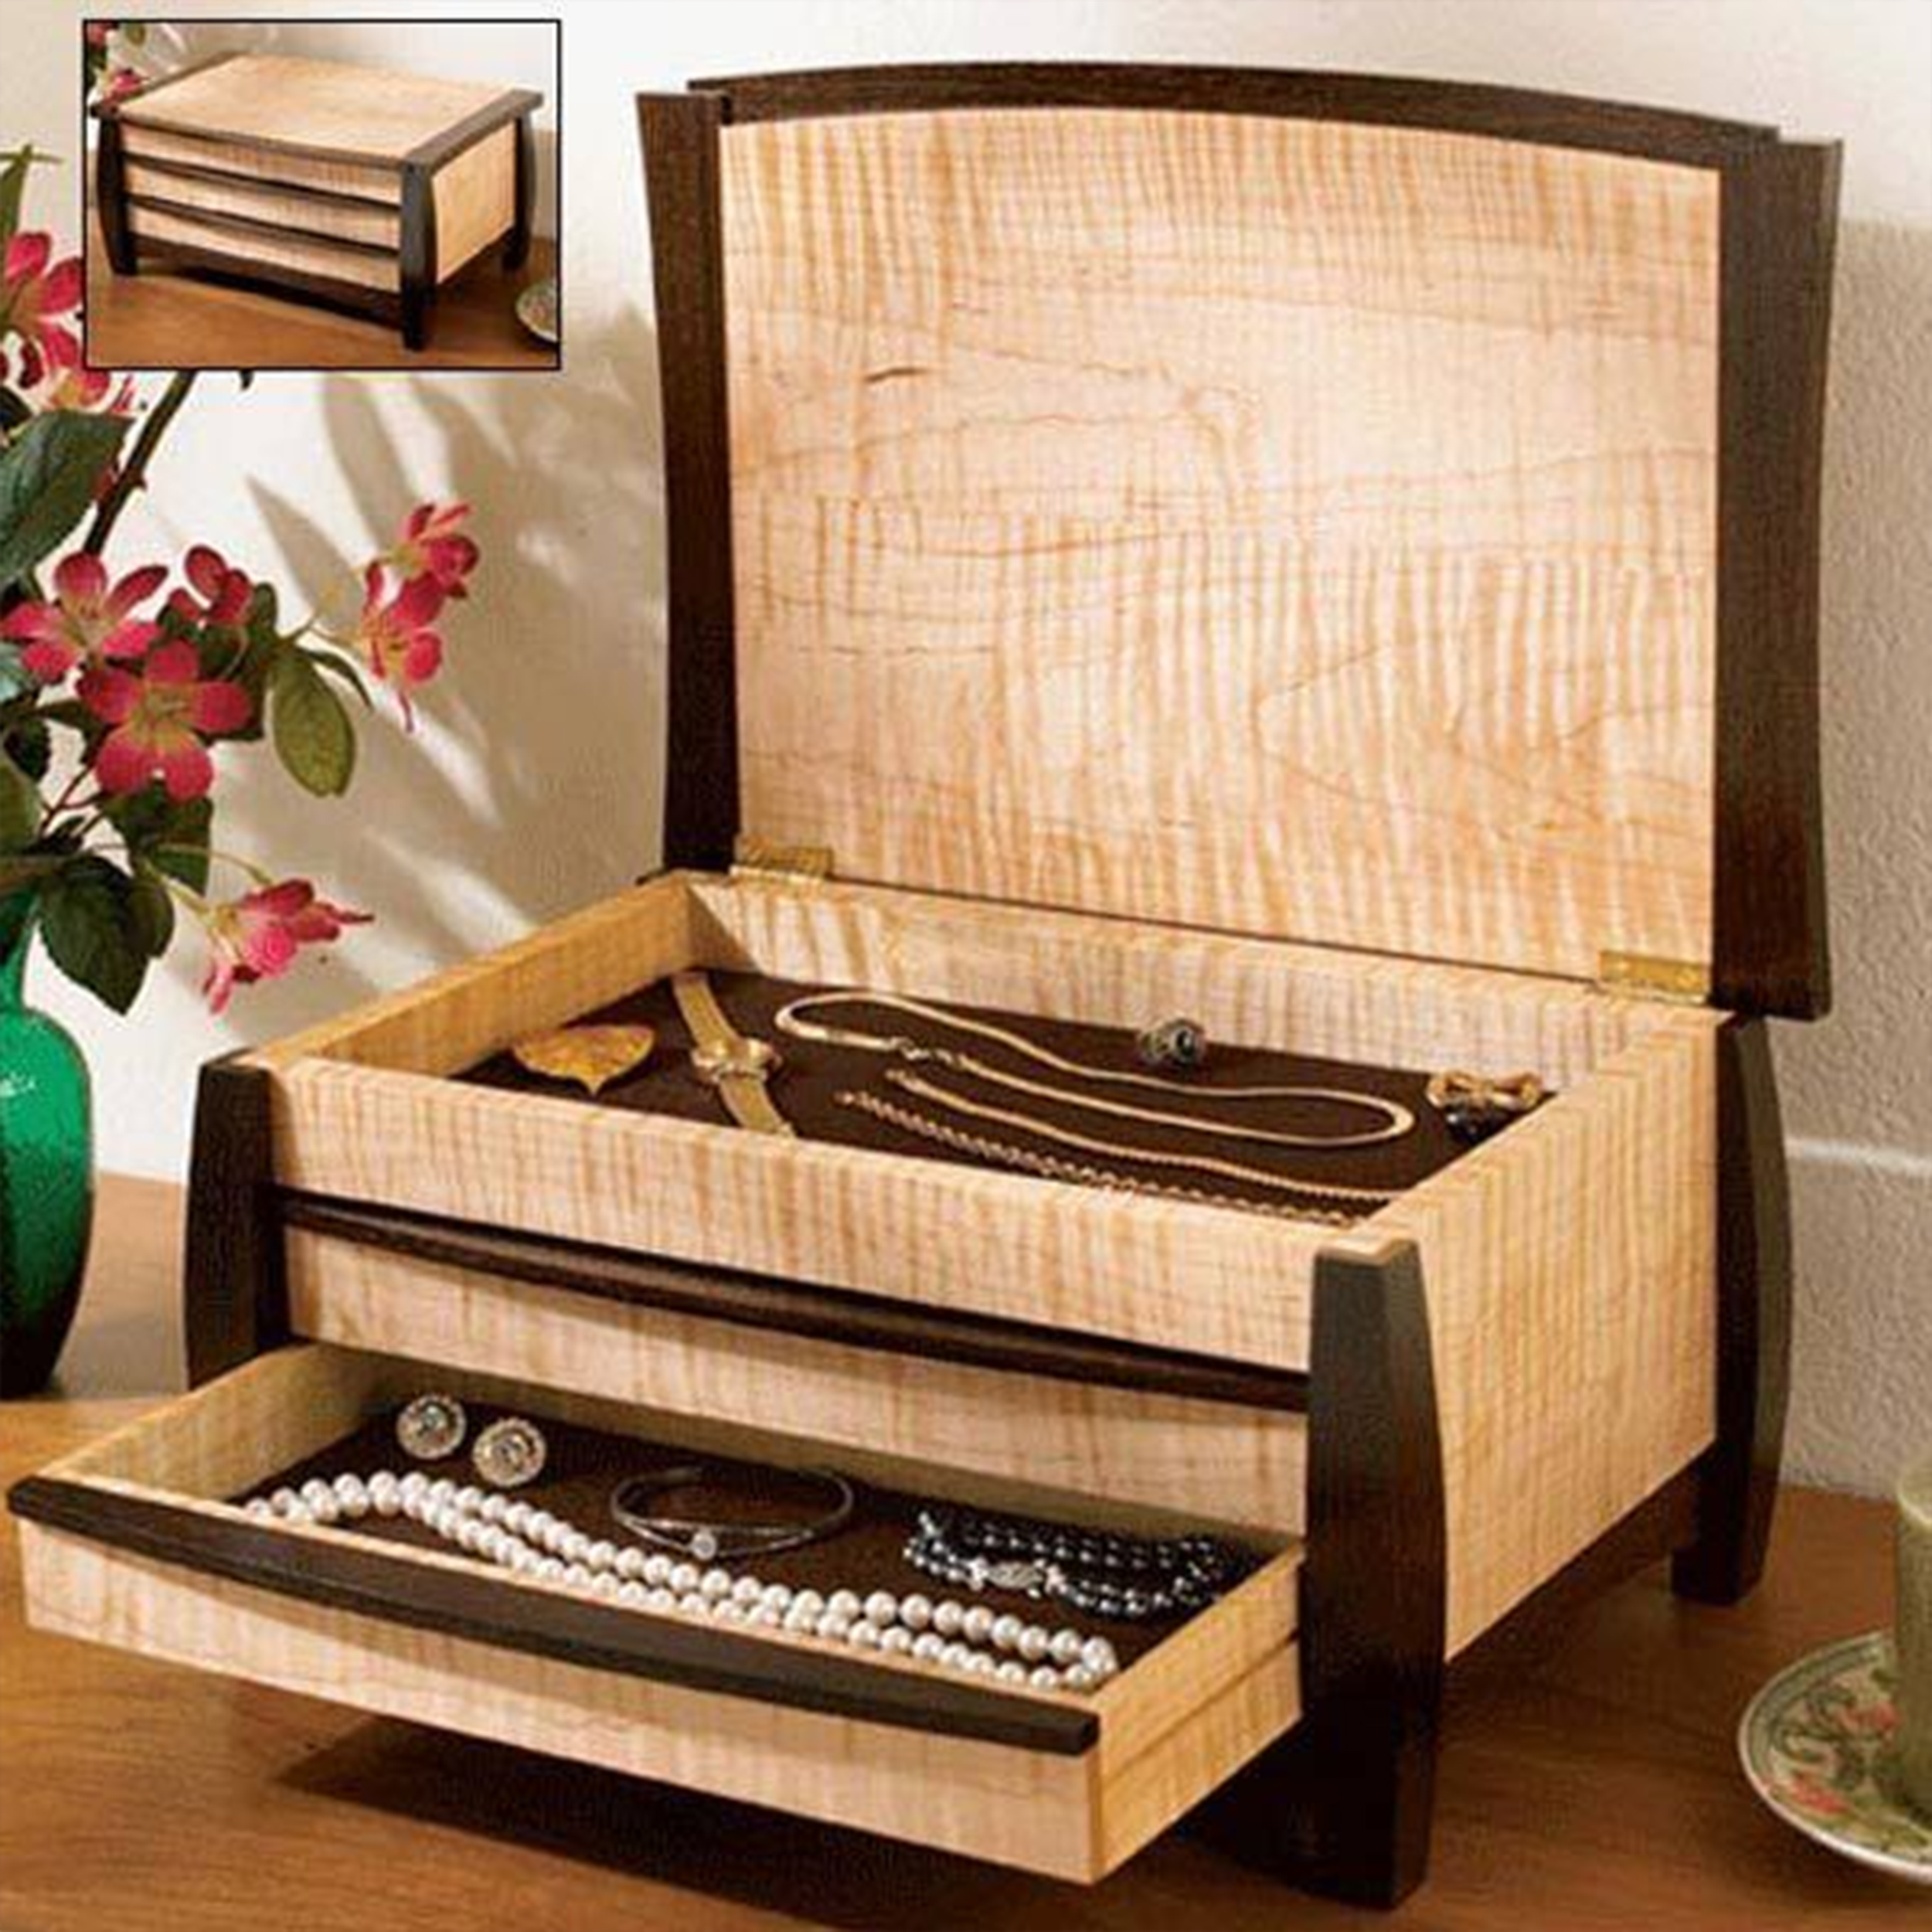 Downloadable Woodworking Project Plan To Build A Gem Of A Jewelry Box